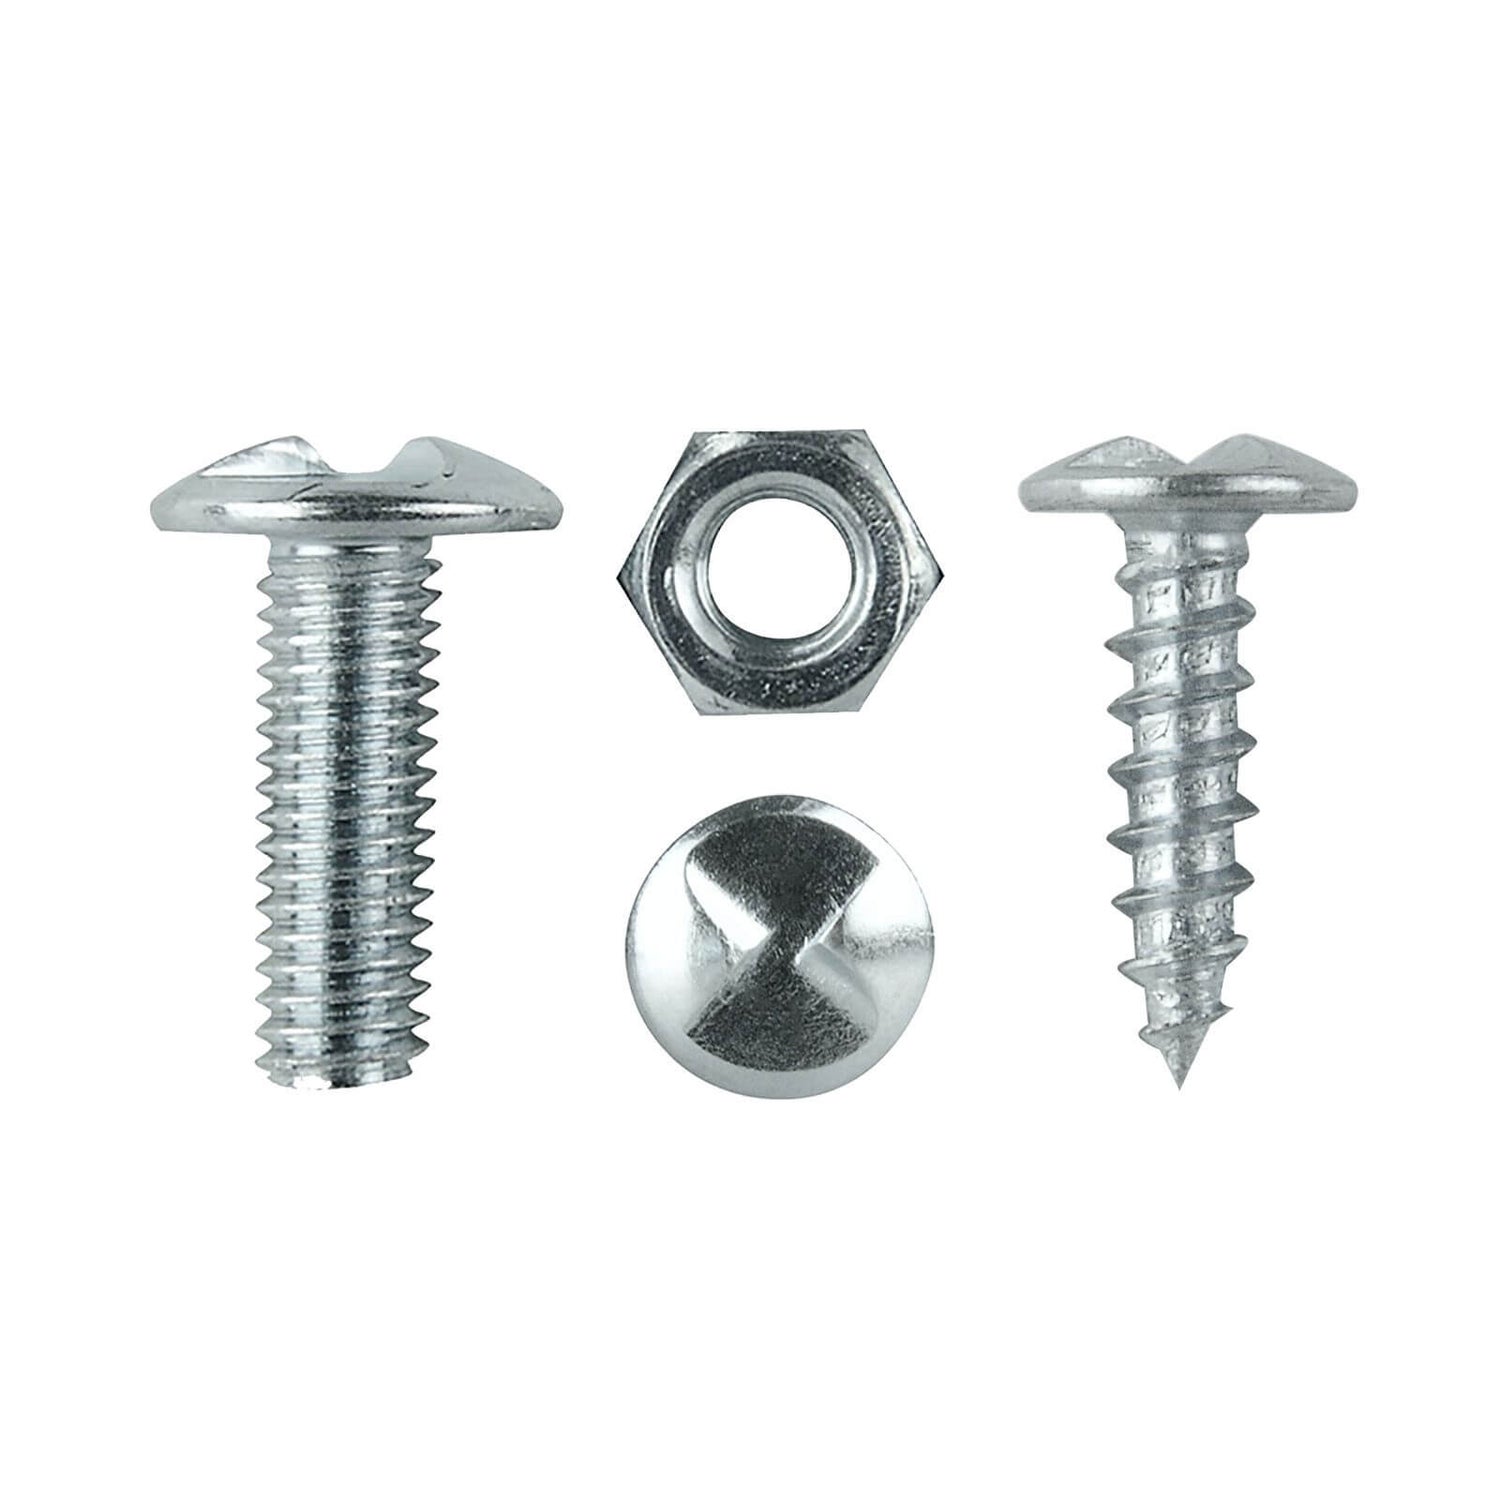 Pinnacle Anti Theft S Assorted, Bed Frame Bolts Bunnings